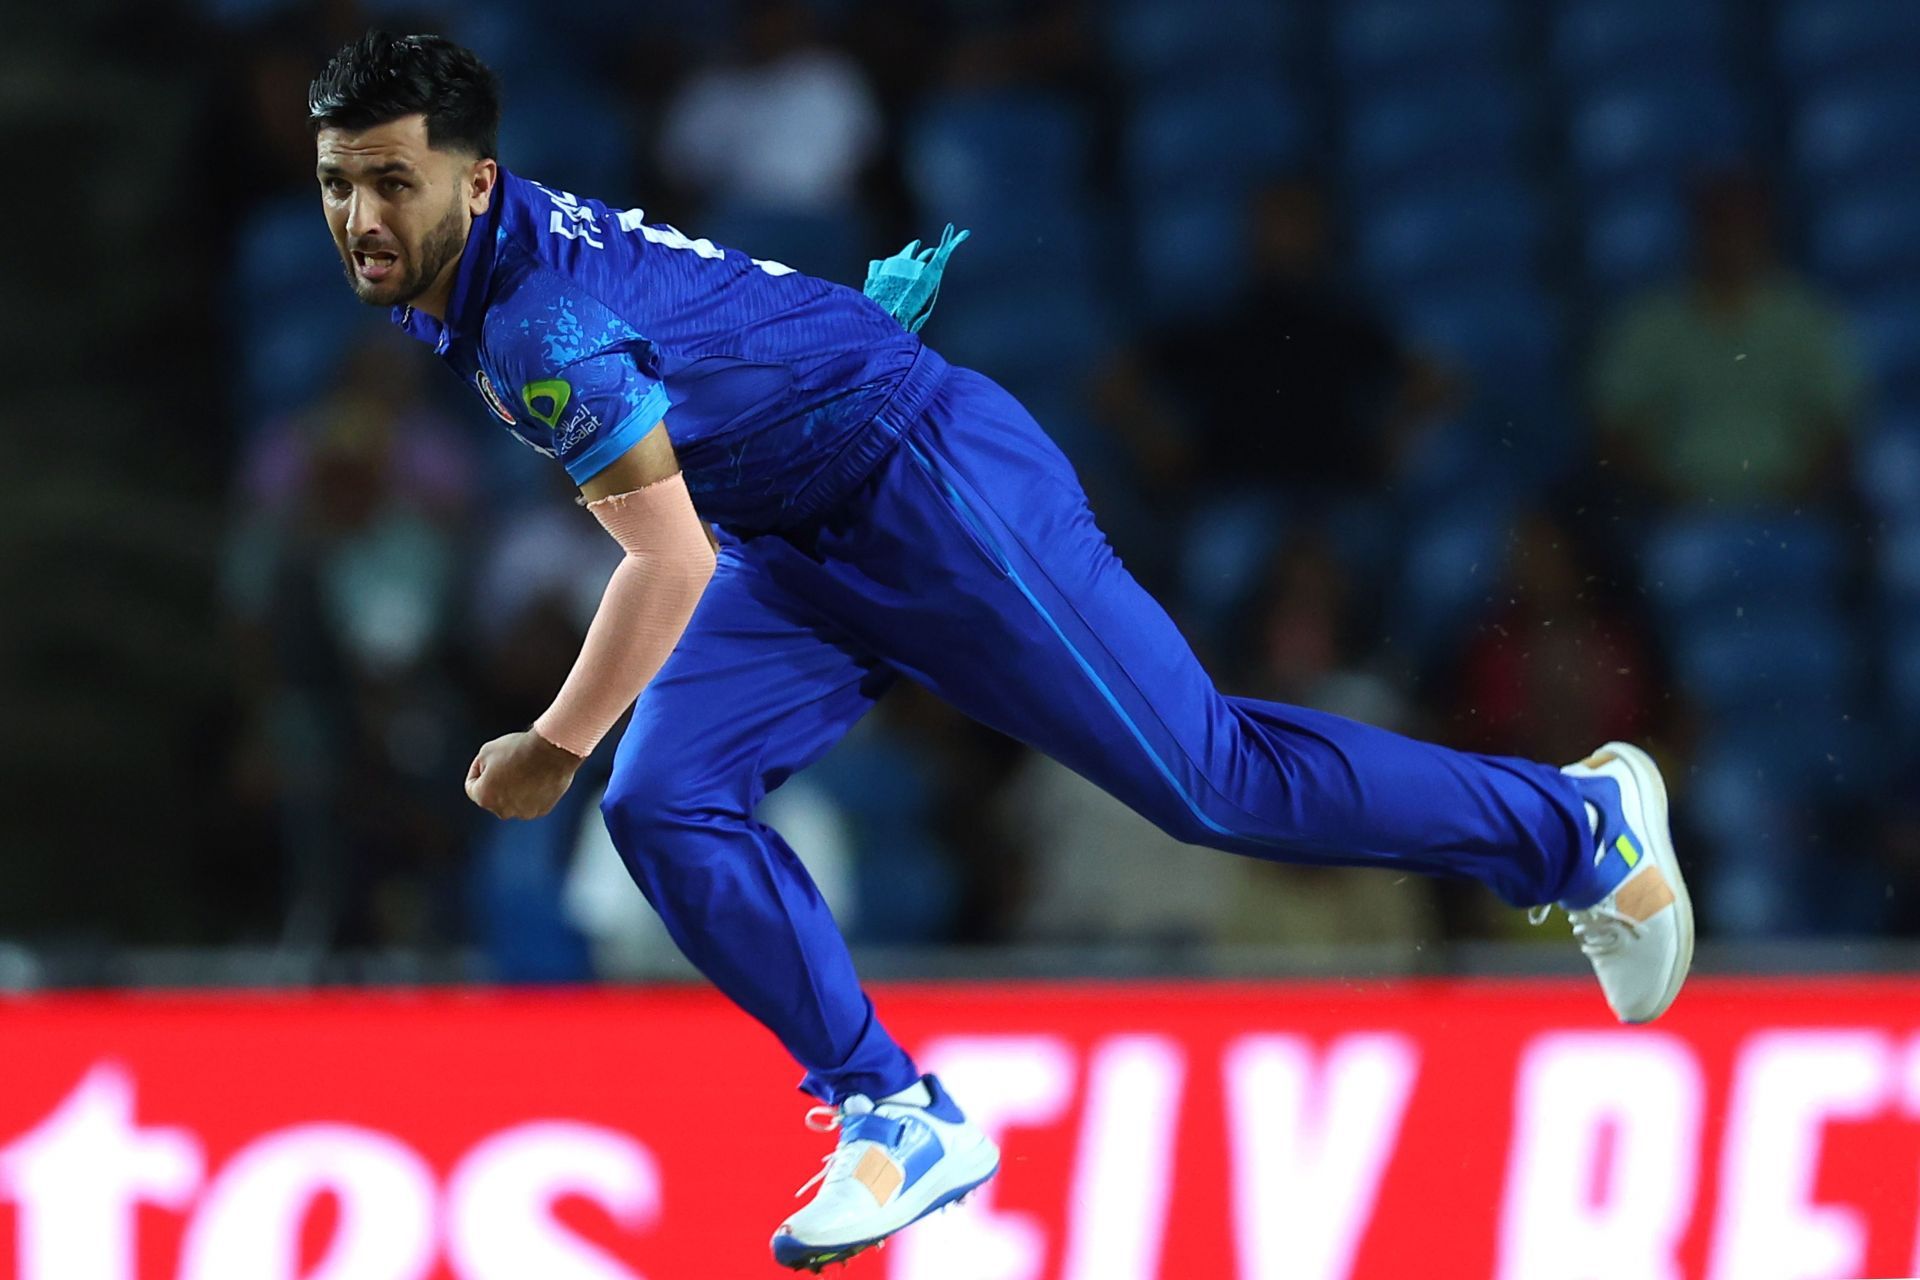 Fazalhaq Farooqi is the highest wicket-taker in the ongoing T20 World Cup.